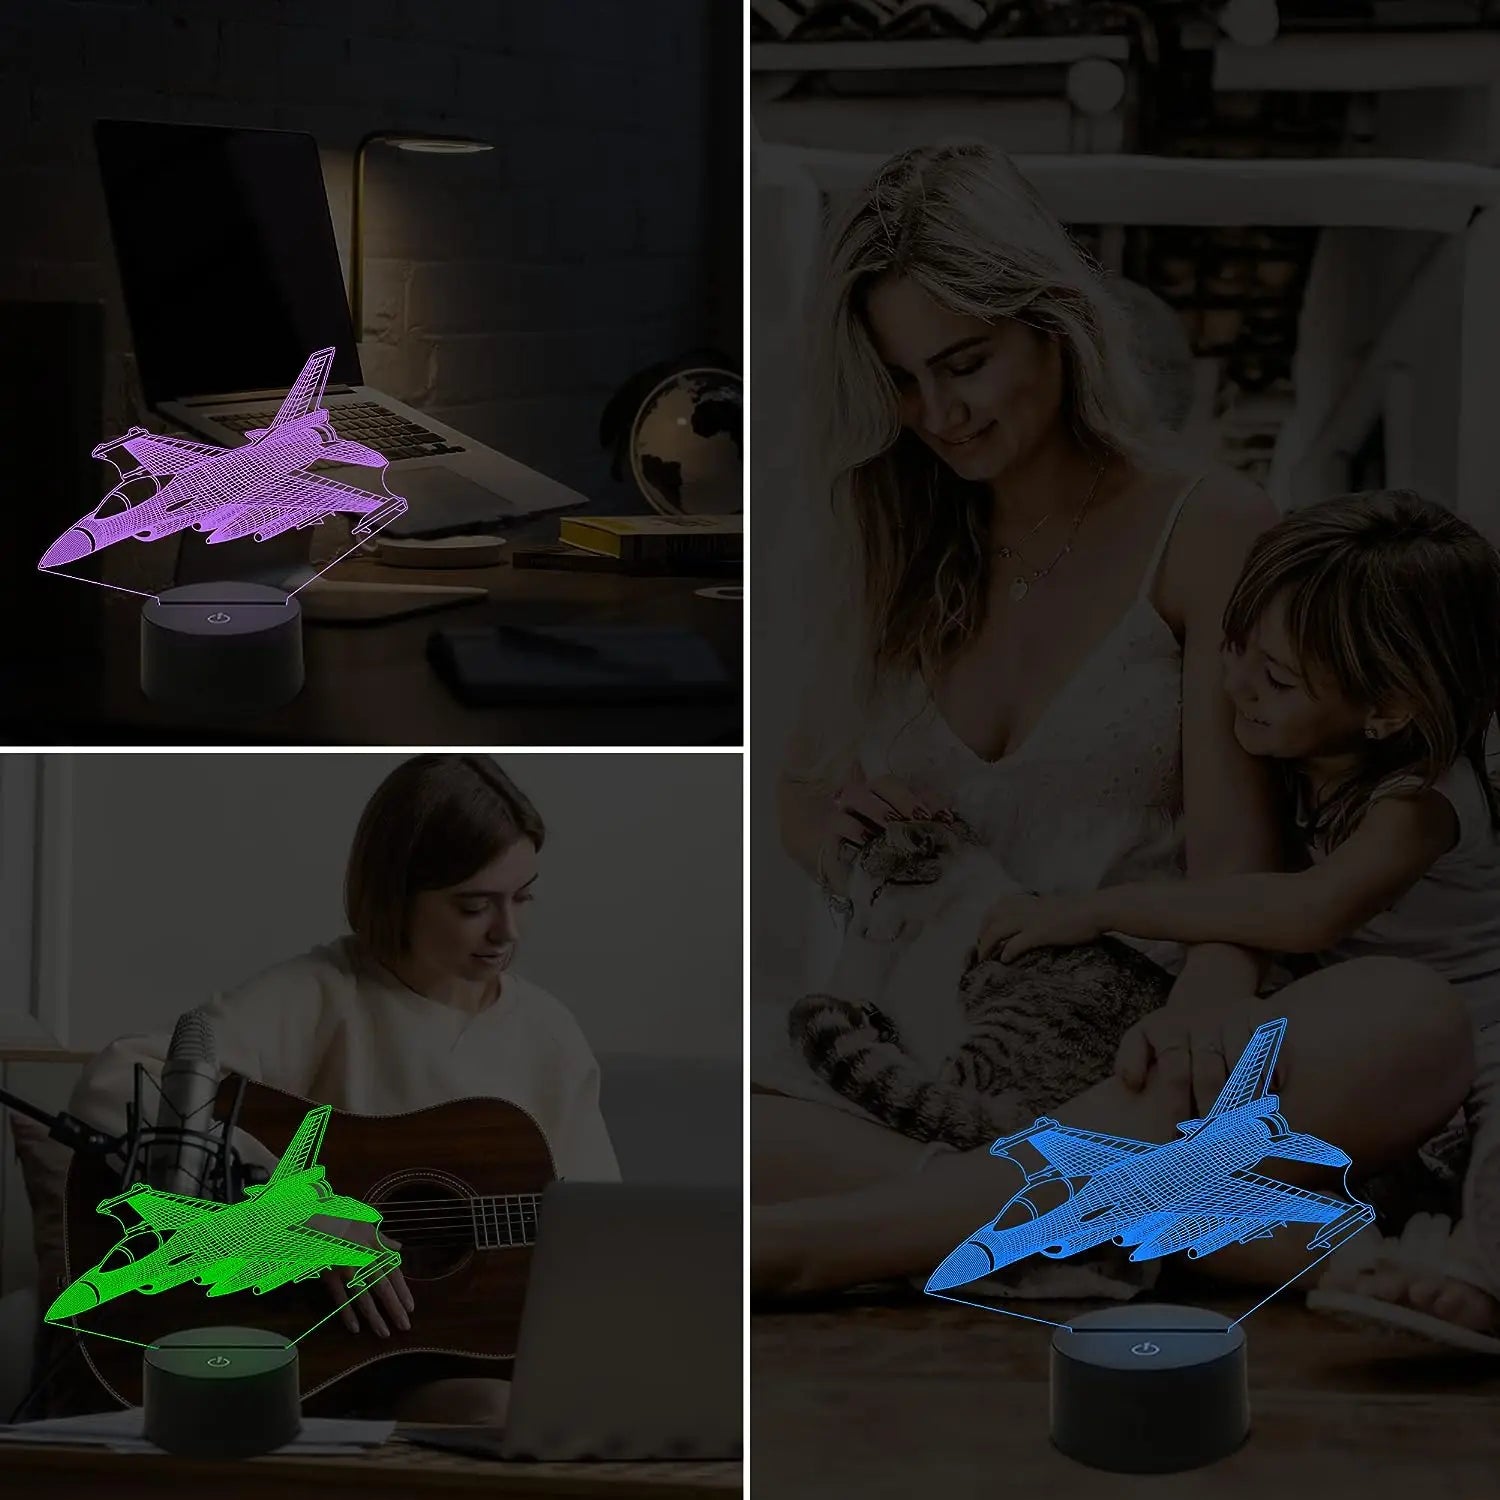 3D Visual Airplane Night Light Aircraft LED Desk Lamp 16 Colors Change Smart Touch Remote Control LED Bedside Table Desk Lamp